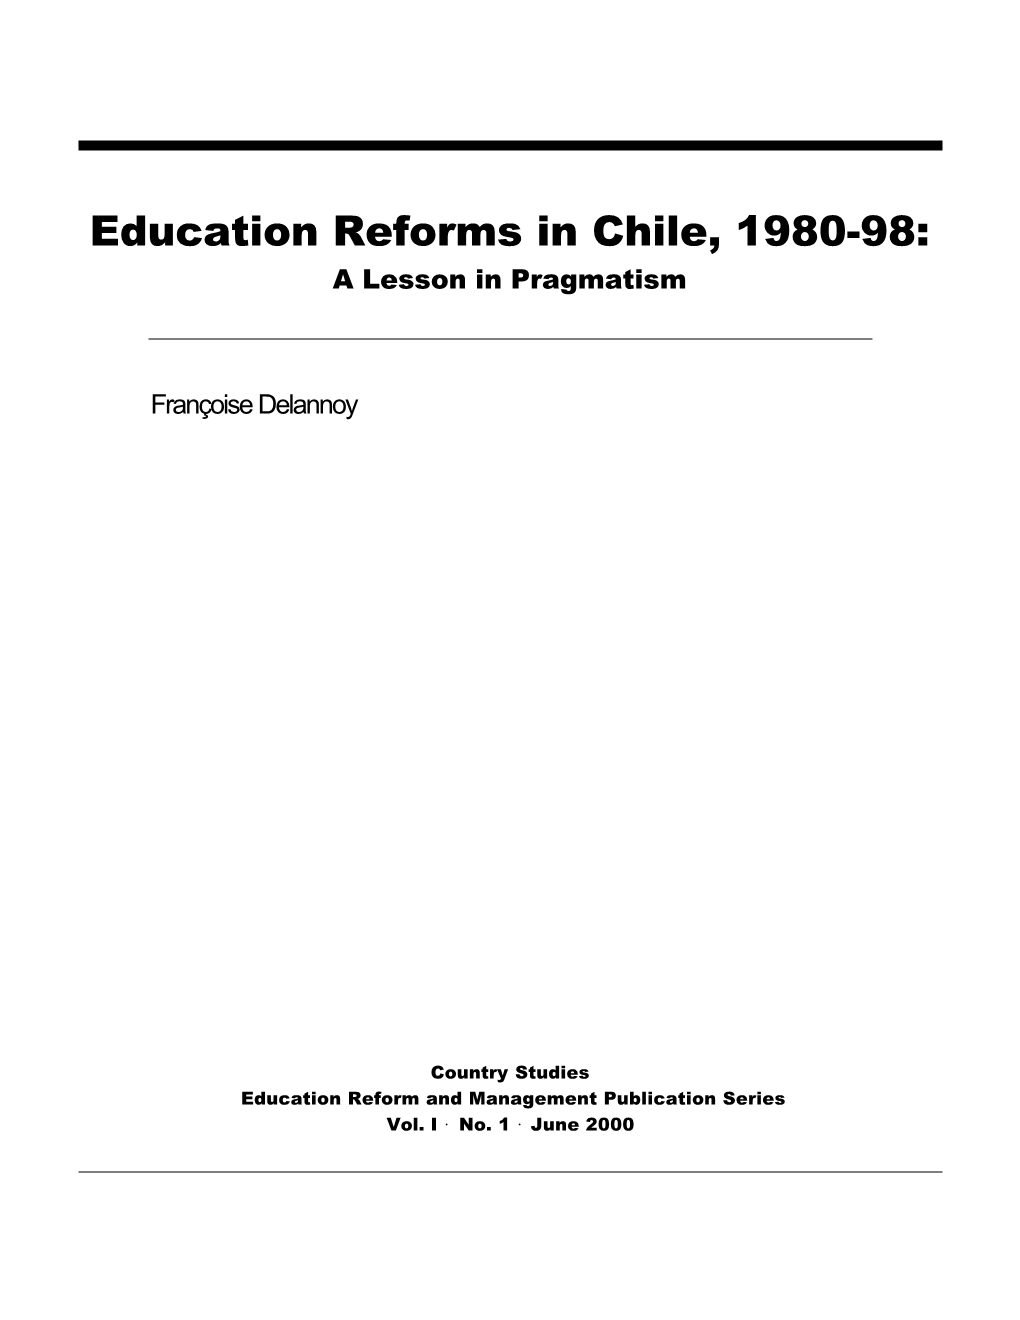 Education Reforms in Chile, 1980-98: a Lesson in Pragmatism